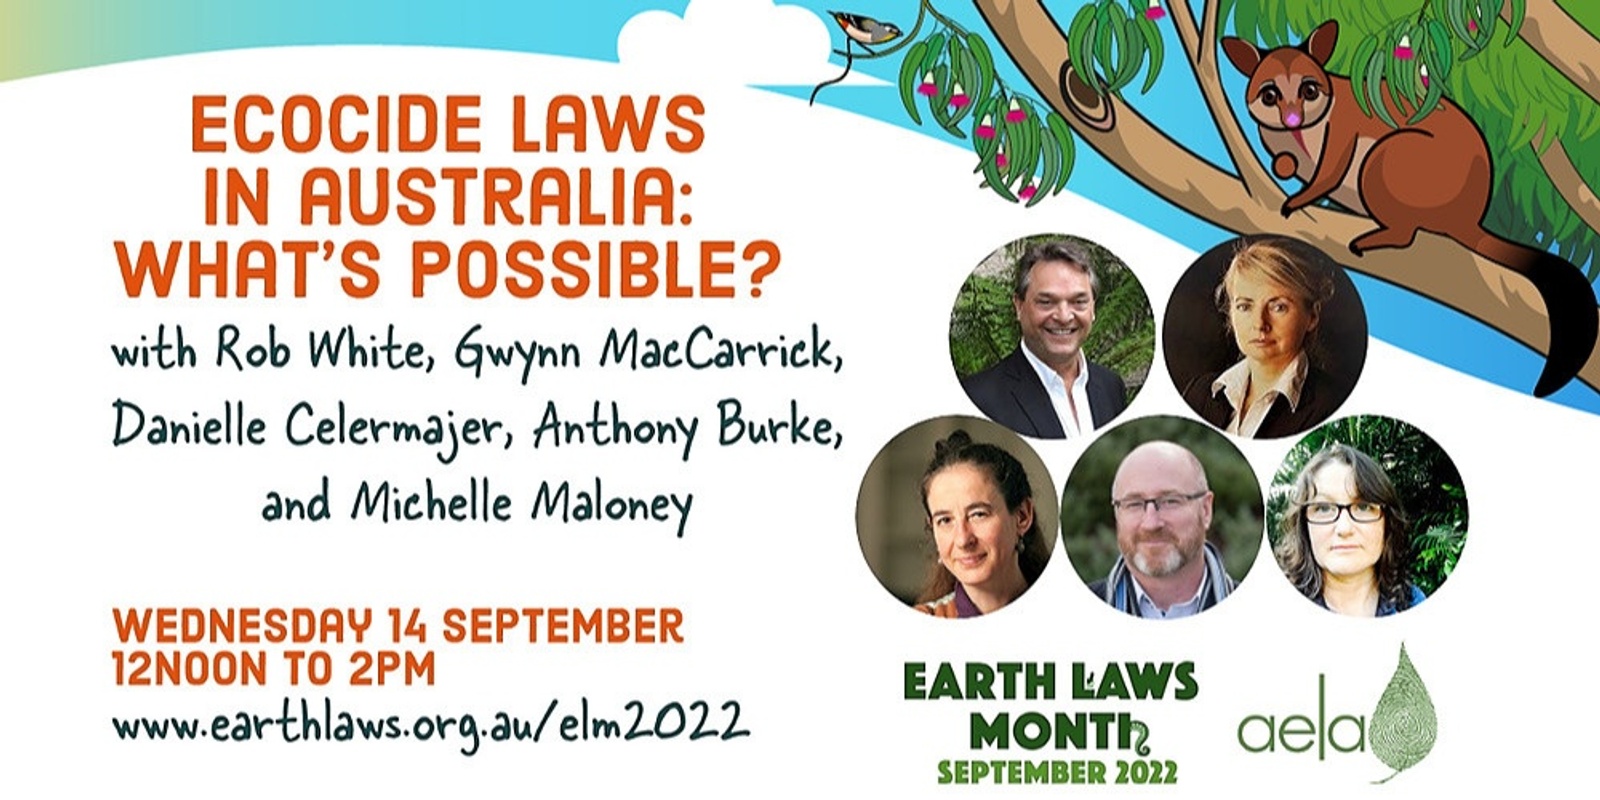 Banner image for Ecocide Laws in Australia: What's Possible? with Rob White, Gwynn MacCarrick, Danielle Celermajer, Anthony Burke & Michelle Maloney